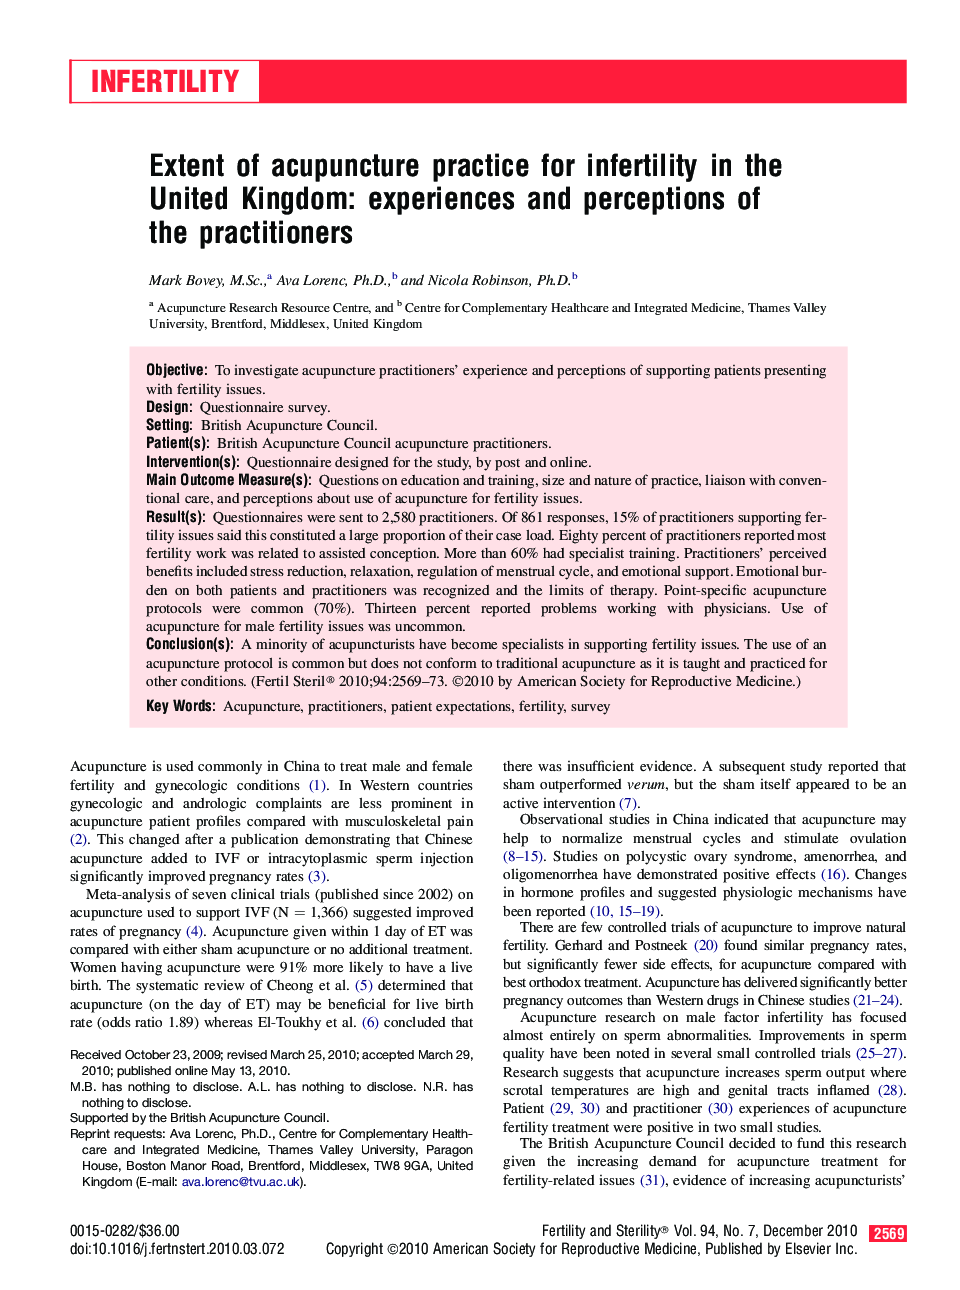 Extent of acupuncture practice for infertility in the United Kingdom: experiences and perceptions of the practitioners